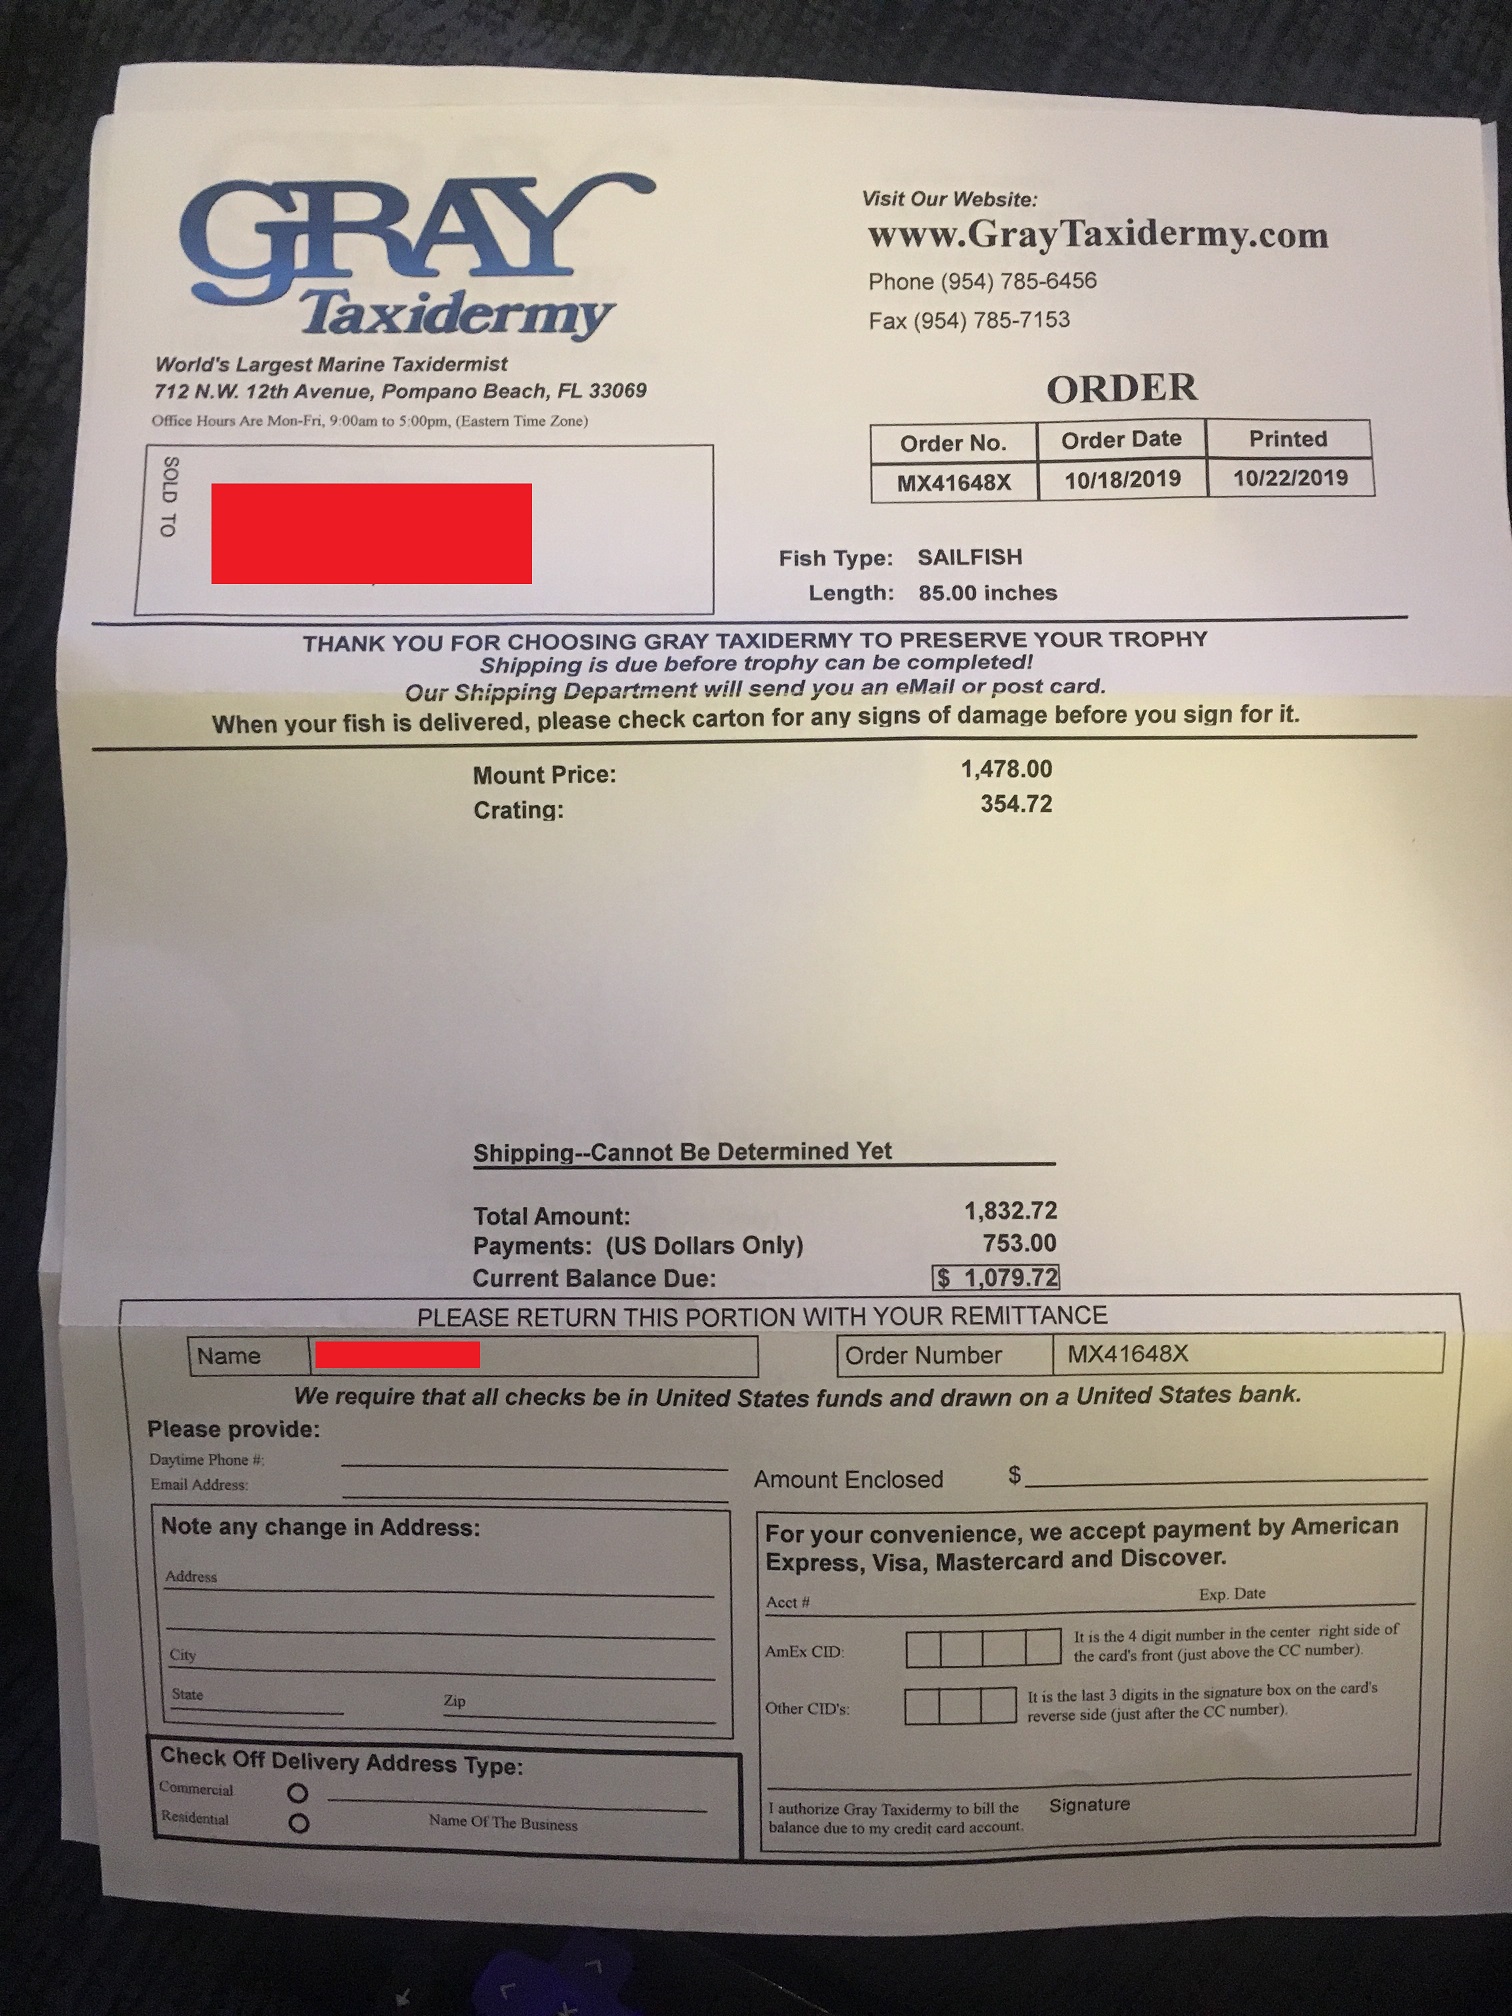 1st invoice received after paying $753 on the boat